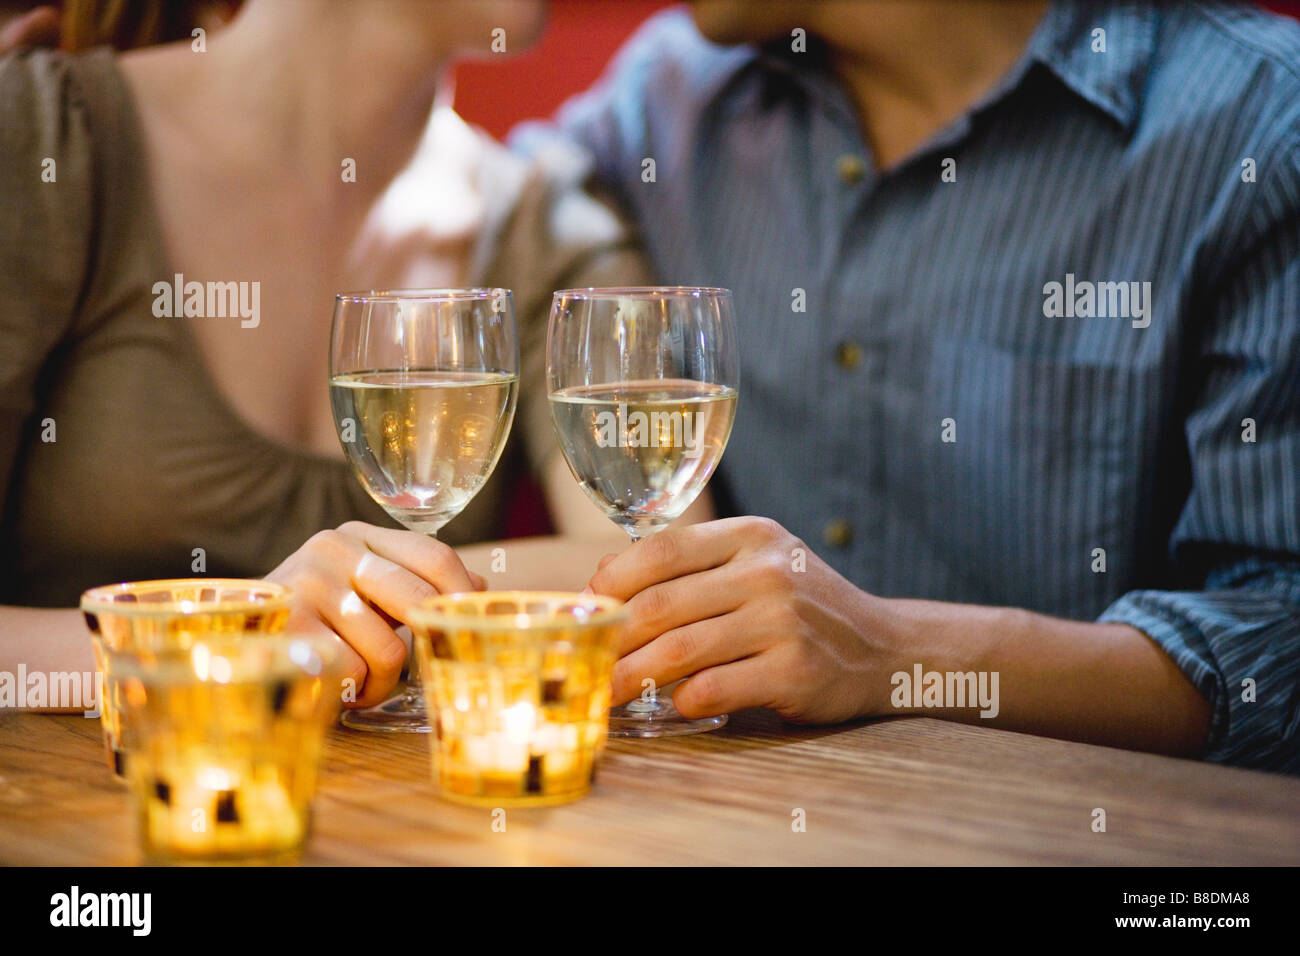 Couple drinking white wine Banque D'Images